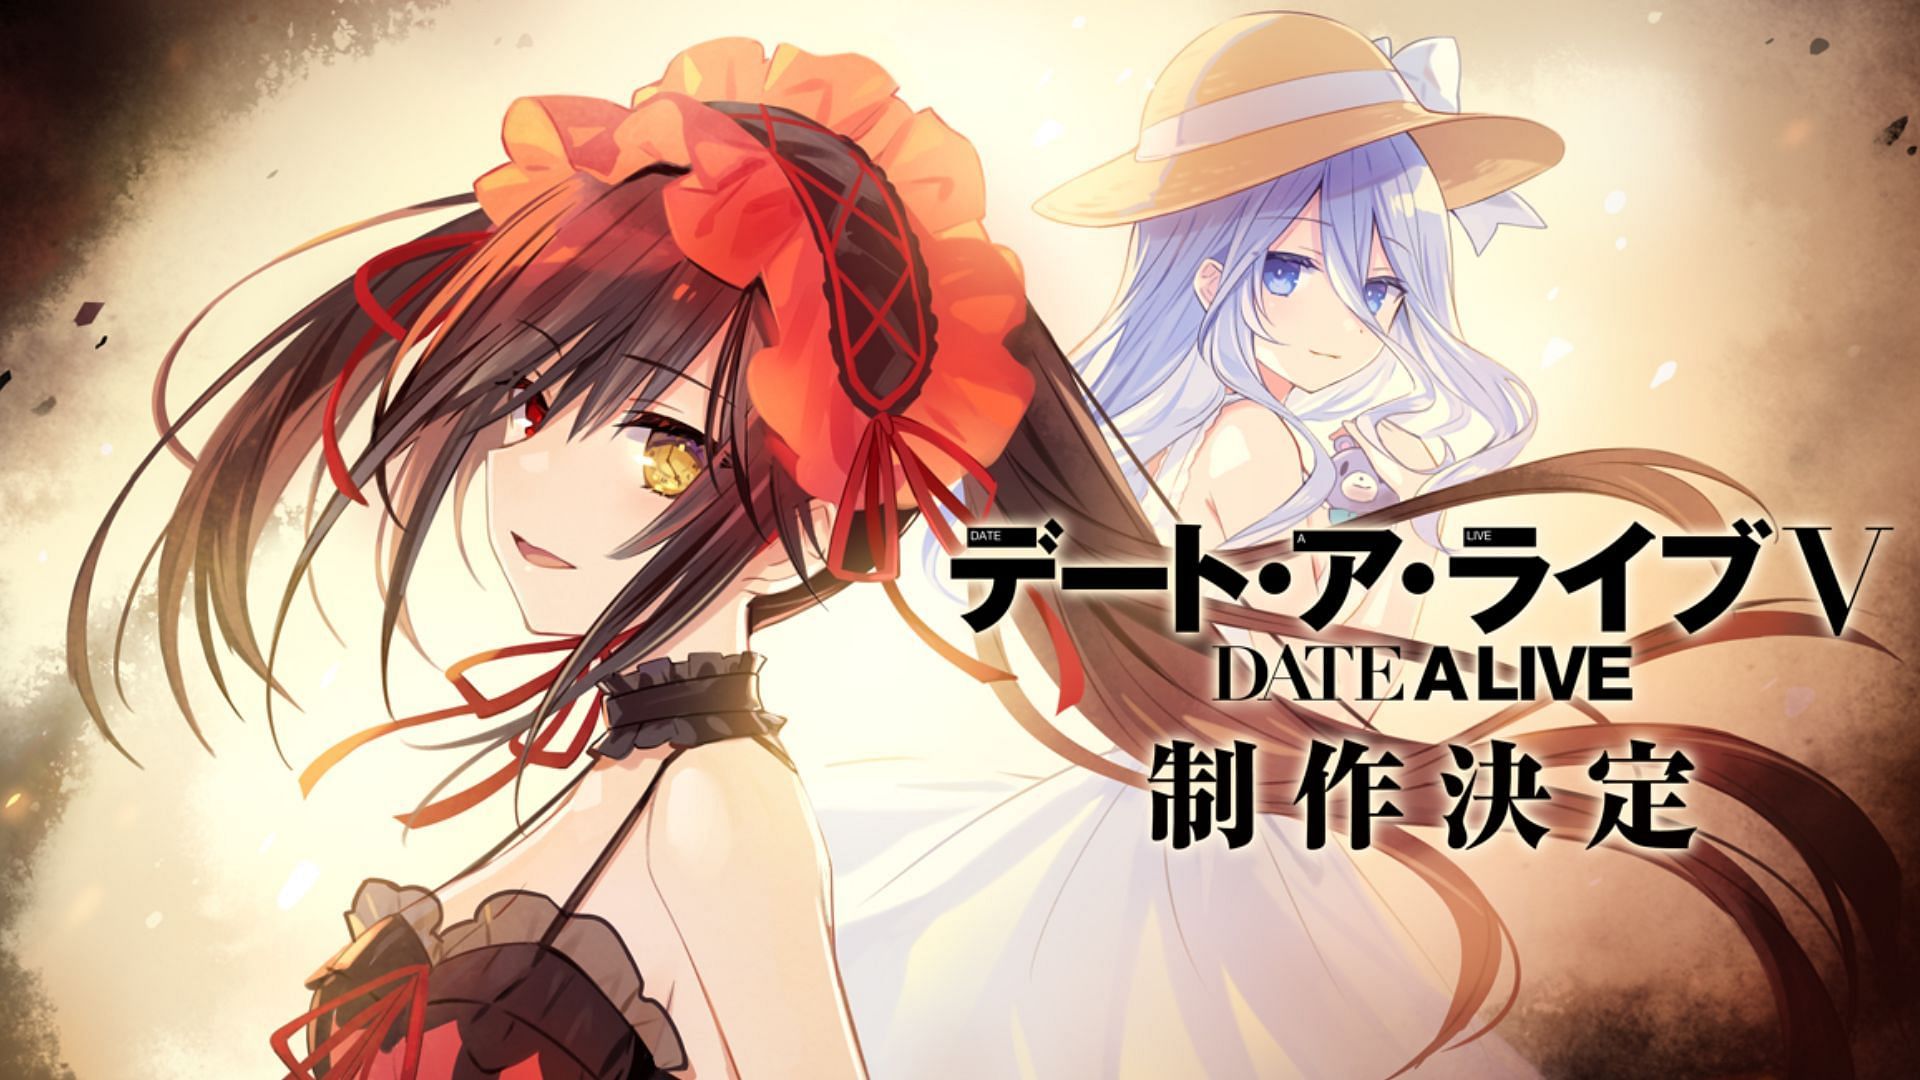 Date A Live anime live-action adaptation allegedly announces